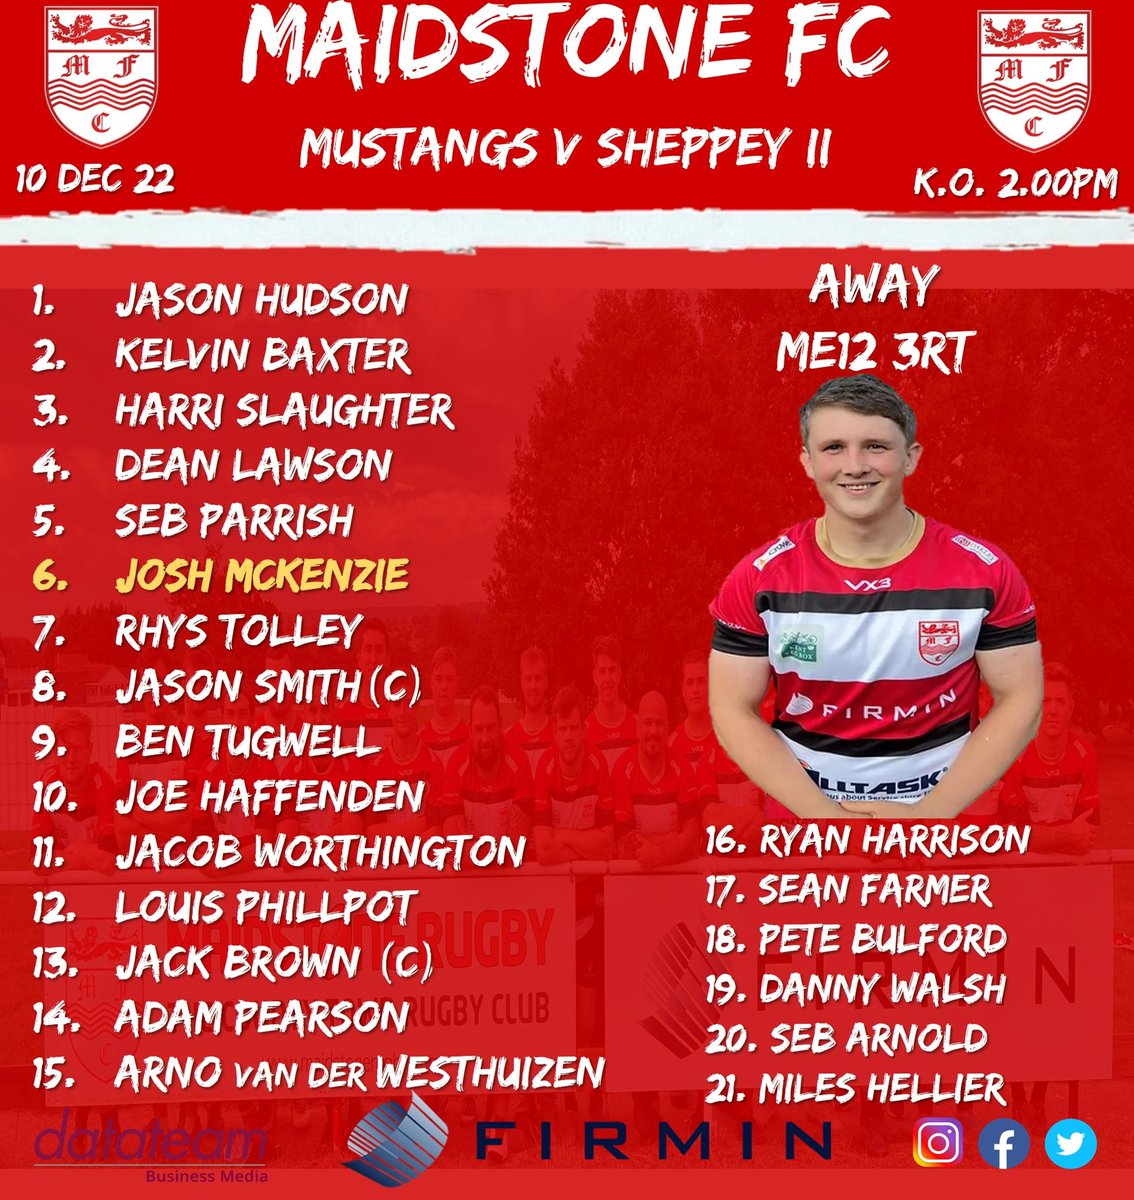 Your Maidstone teams heading onto the field this Saturday powered by @TrustFirmin ! 1st XV at The Mote v @WESTCOMBE_PARK II & Mustangs away to @SheppeyRFC_1892 II. 
Go well gents 🔴⚪️⚫️💪🏻

#onegreatclub #maidstonebusiness

@AlltaskLtd @KentVegBox @DatateamMedia